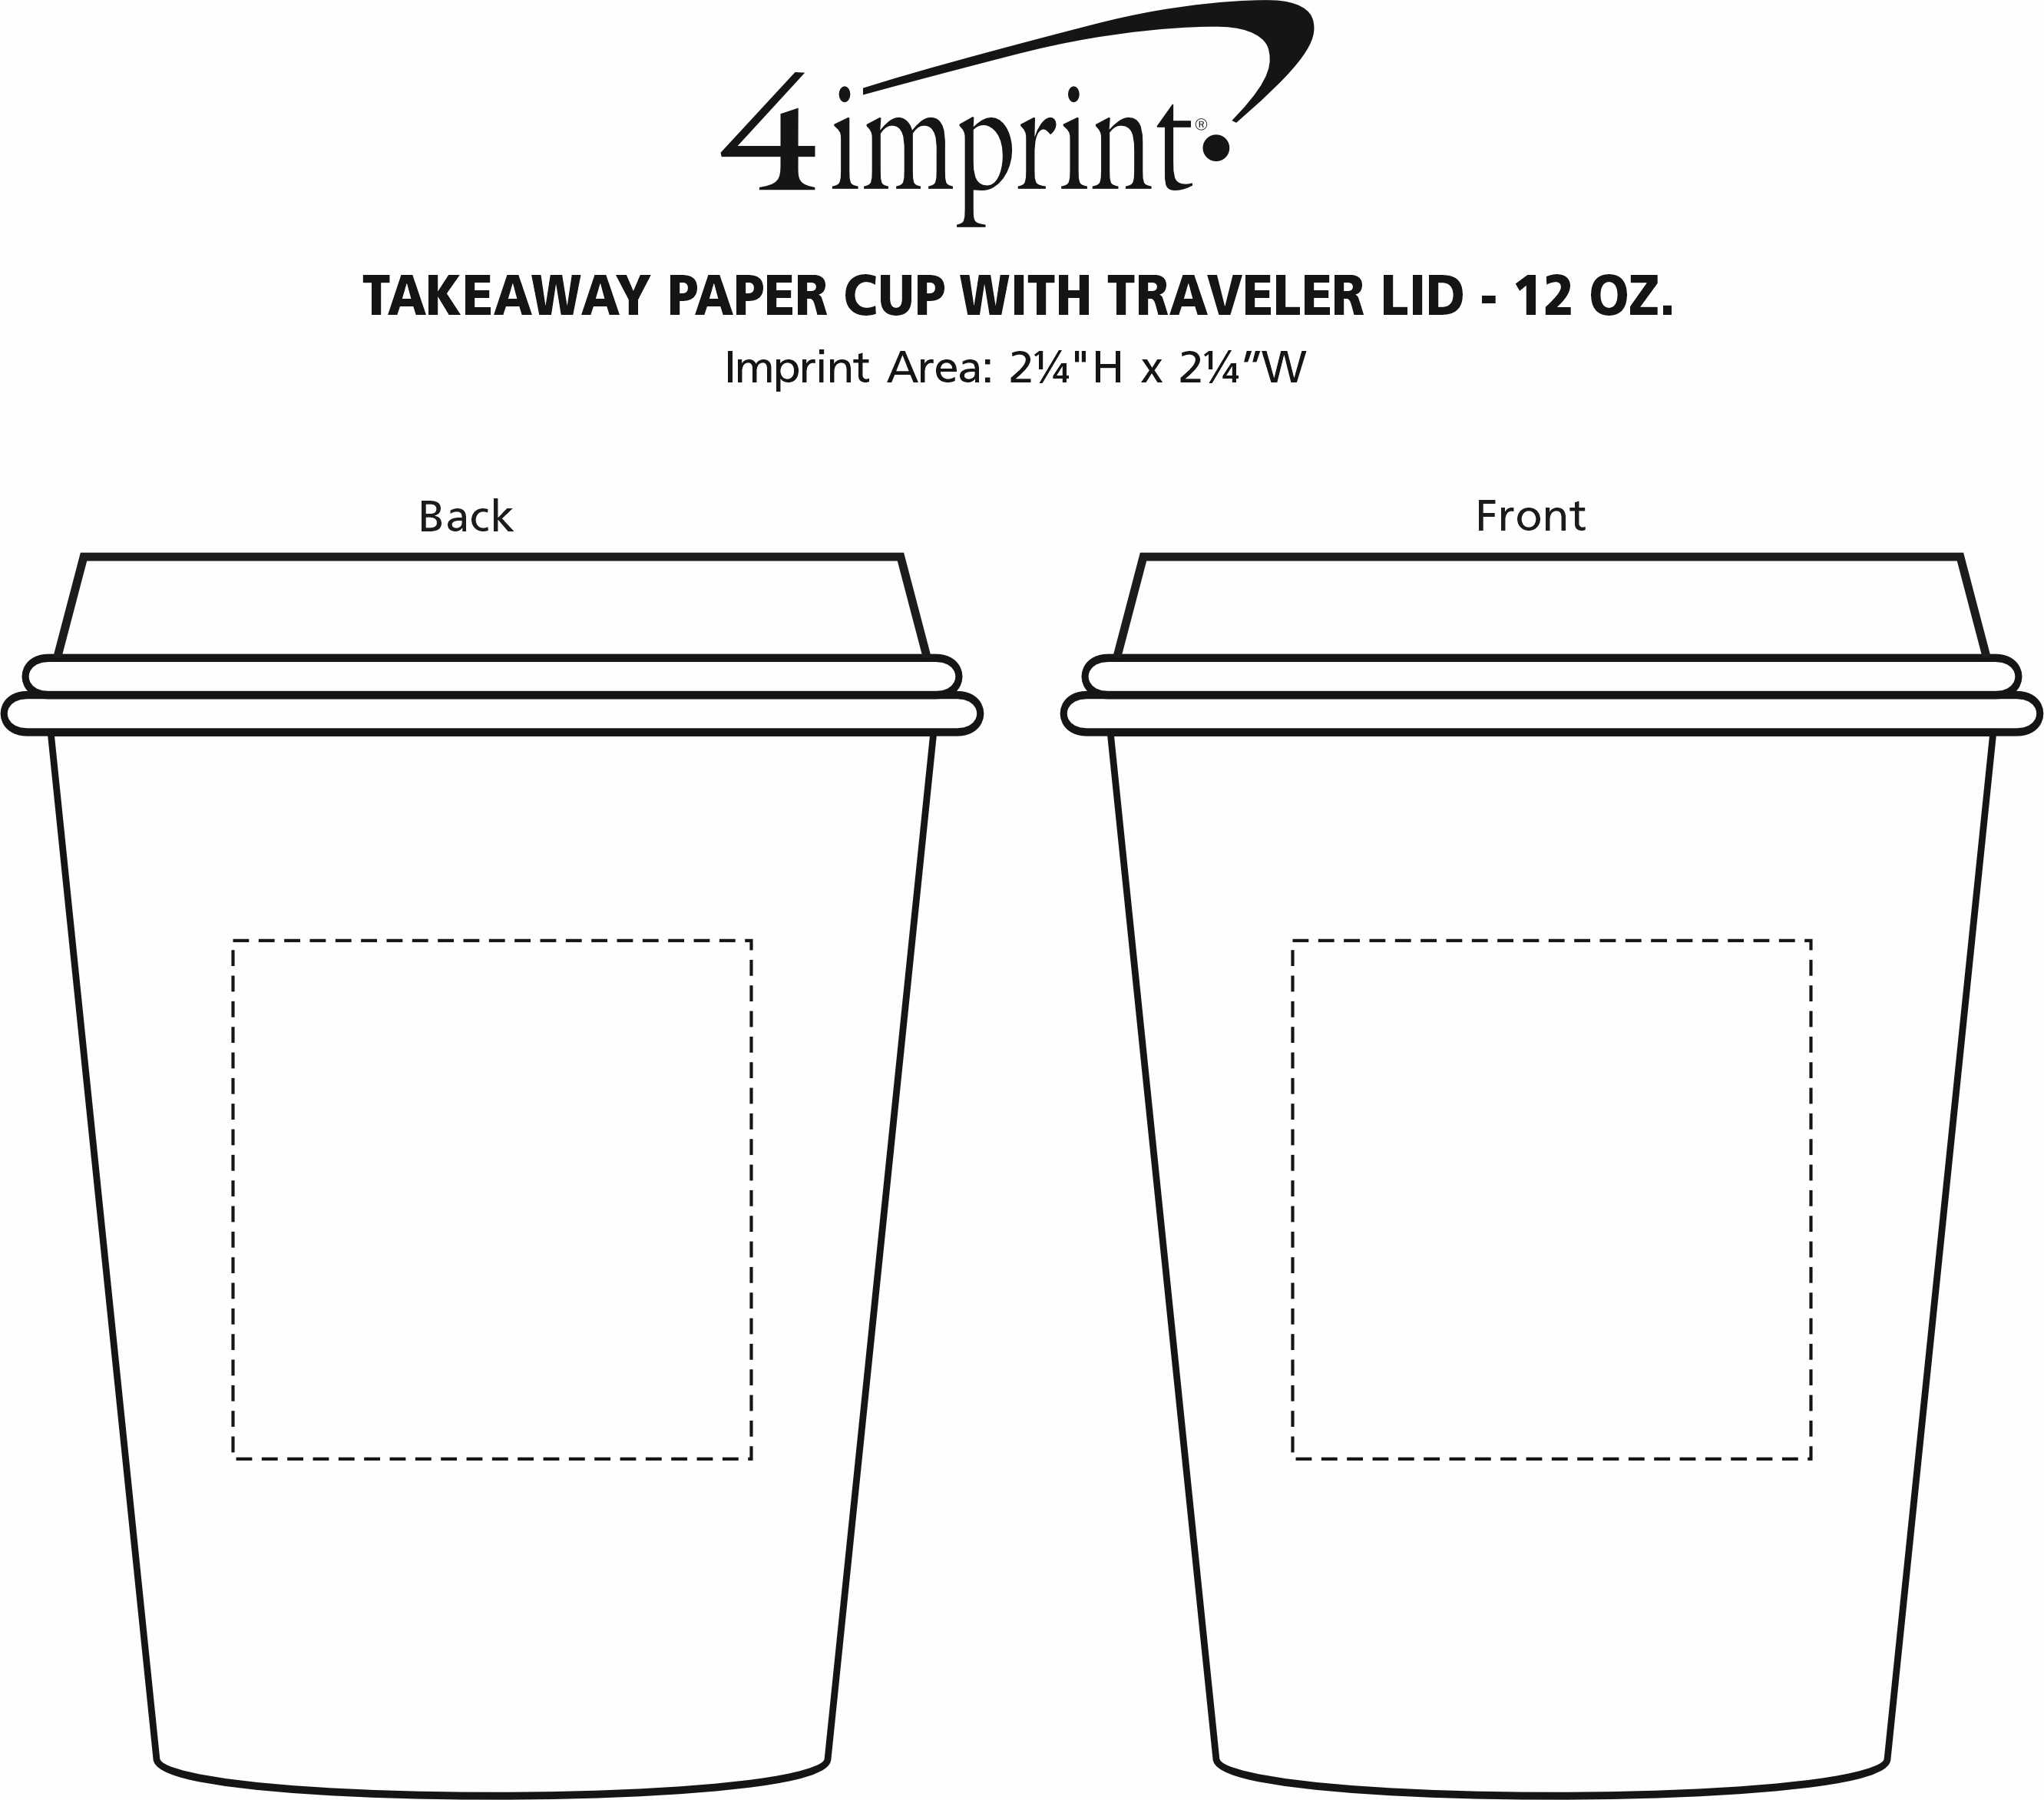 Imprint Area of Takeaway Paper Cup with Traveler Lid - 12 oz.